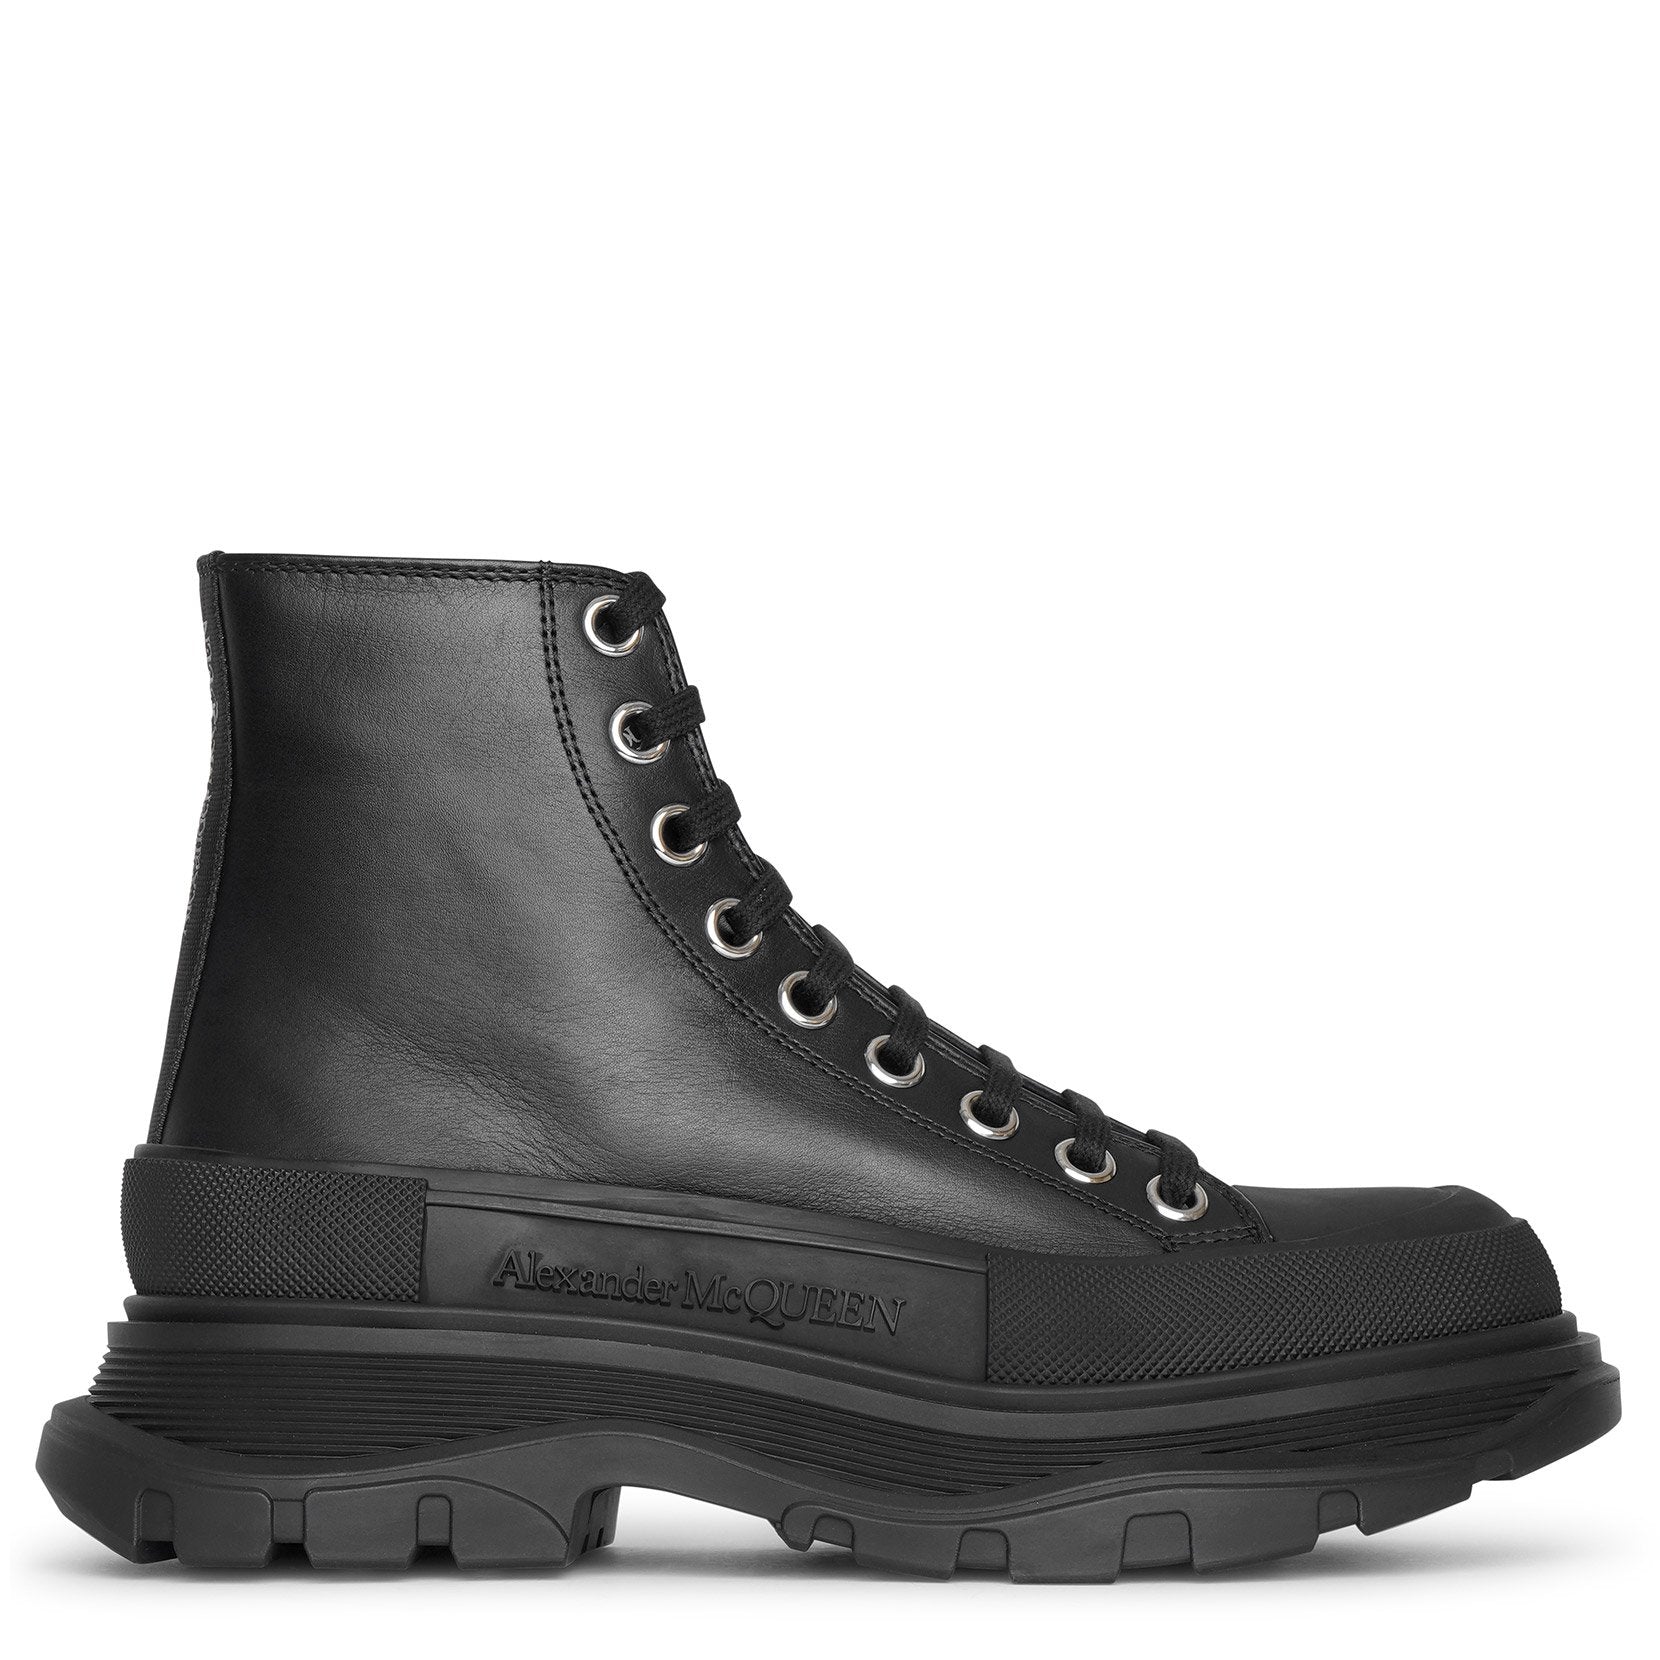 Tread slick high-top black leather boots